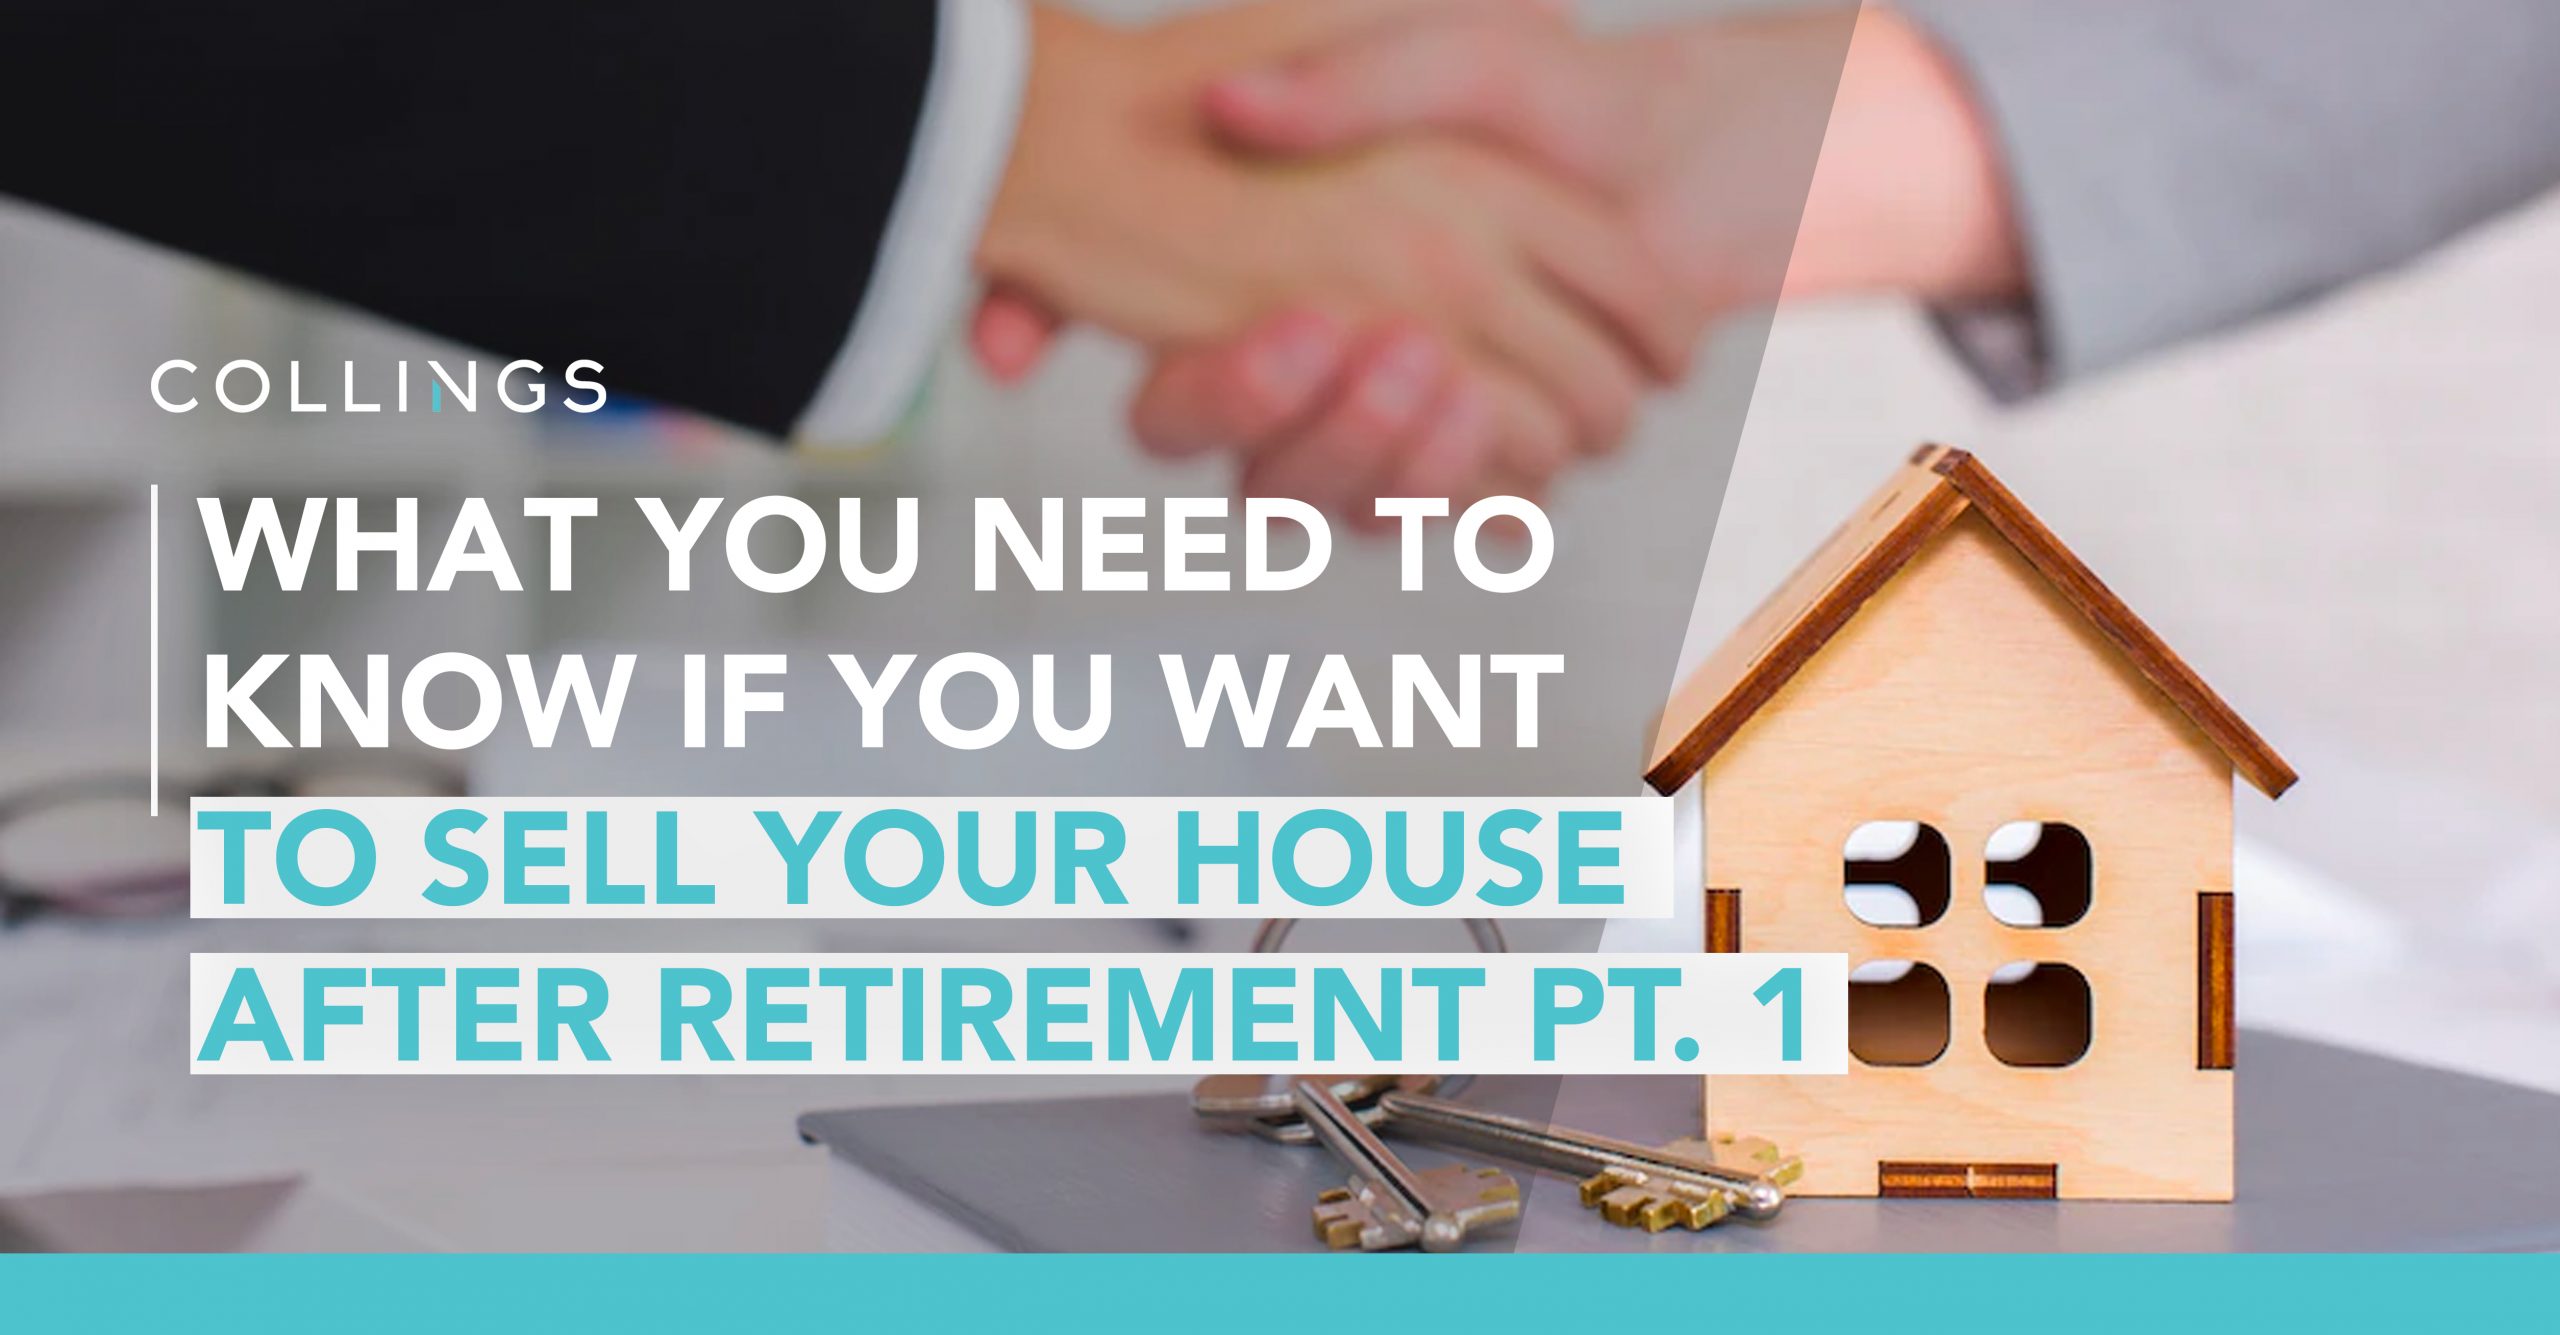 What you need to know if you want to sell your house after retirement